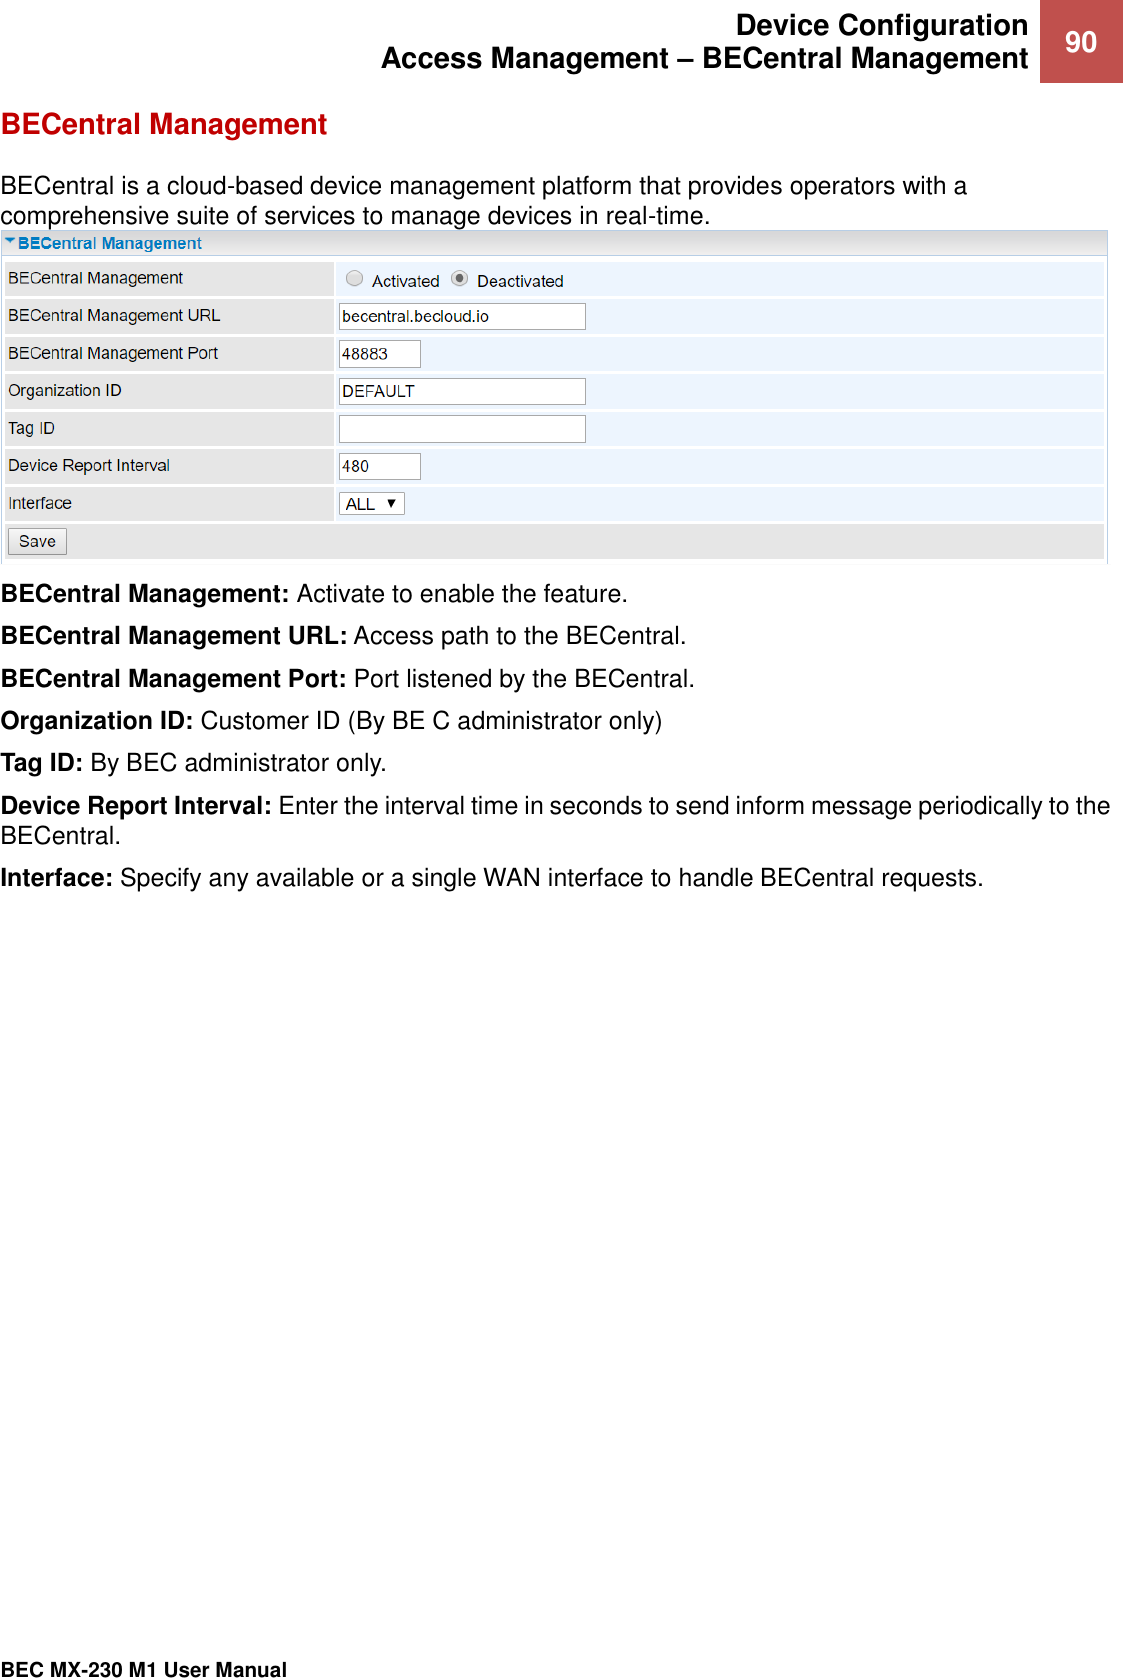  Device Configuration Access Management – BECentral Management 90   BEC MX-230 M1 User Manual  BECentral Management BECentral is a cloud-based device management platform that provides operators with a comprehensive suite of services to manage devices in real-time.  BECentral Management: Activate to enable the feature. BECentral Management URL: Access path to the BECentral. BECentral Management Port: Port listened by the BECentral. Organization ID: Customer ID (By BE C administrator only) Tag ID: By BEC administrator only.  Device Report Interval: Enter the interval time in seconds to send inform message periodically to the BECentral.  Interface: Specify any available or a single WAN interface to handle BECentral requests. 